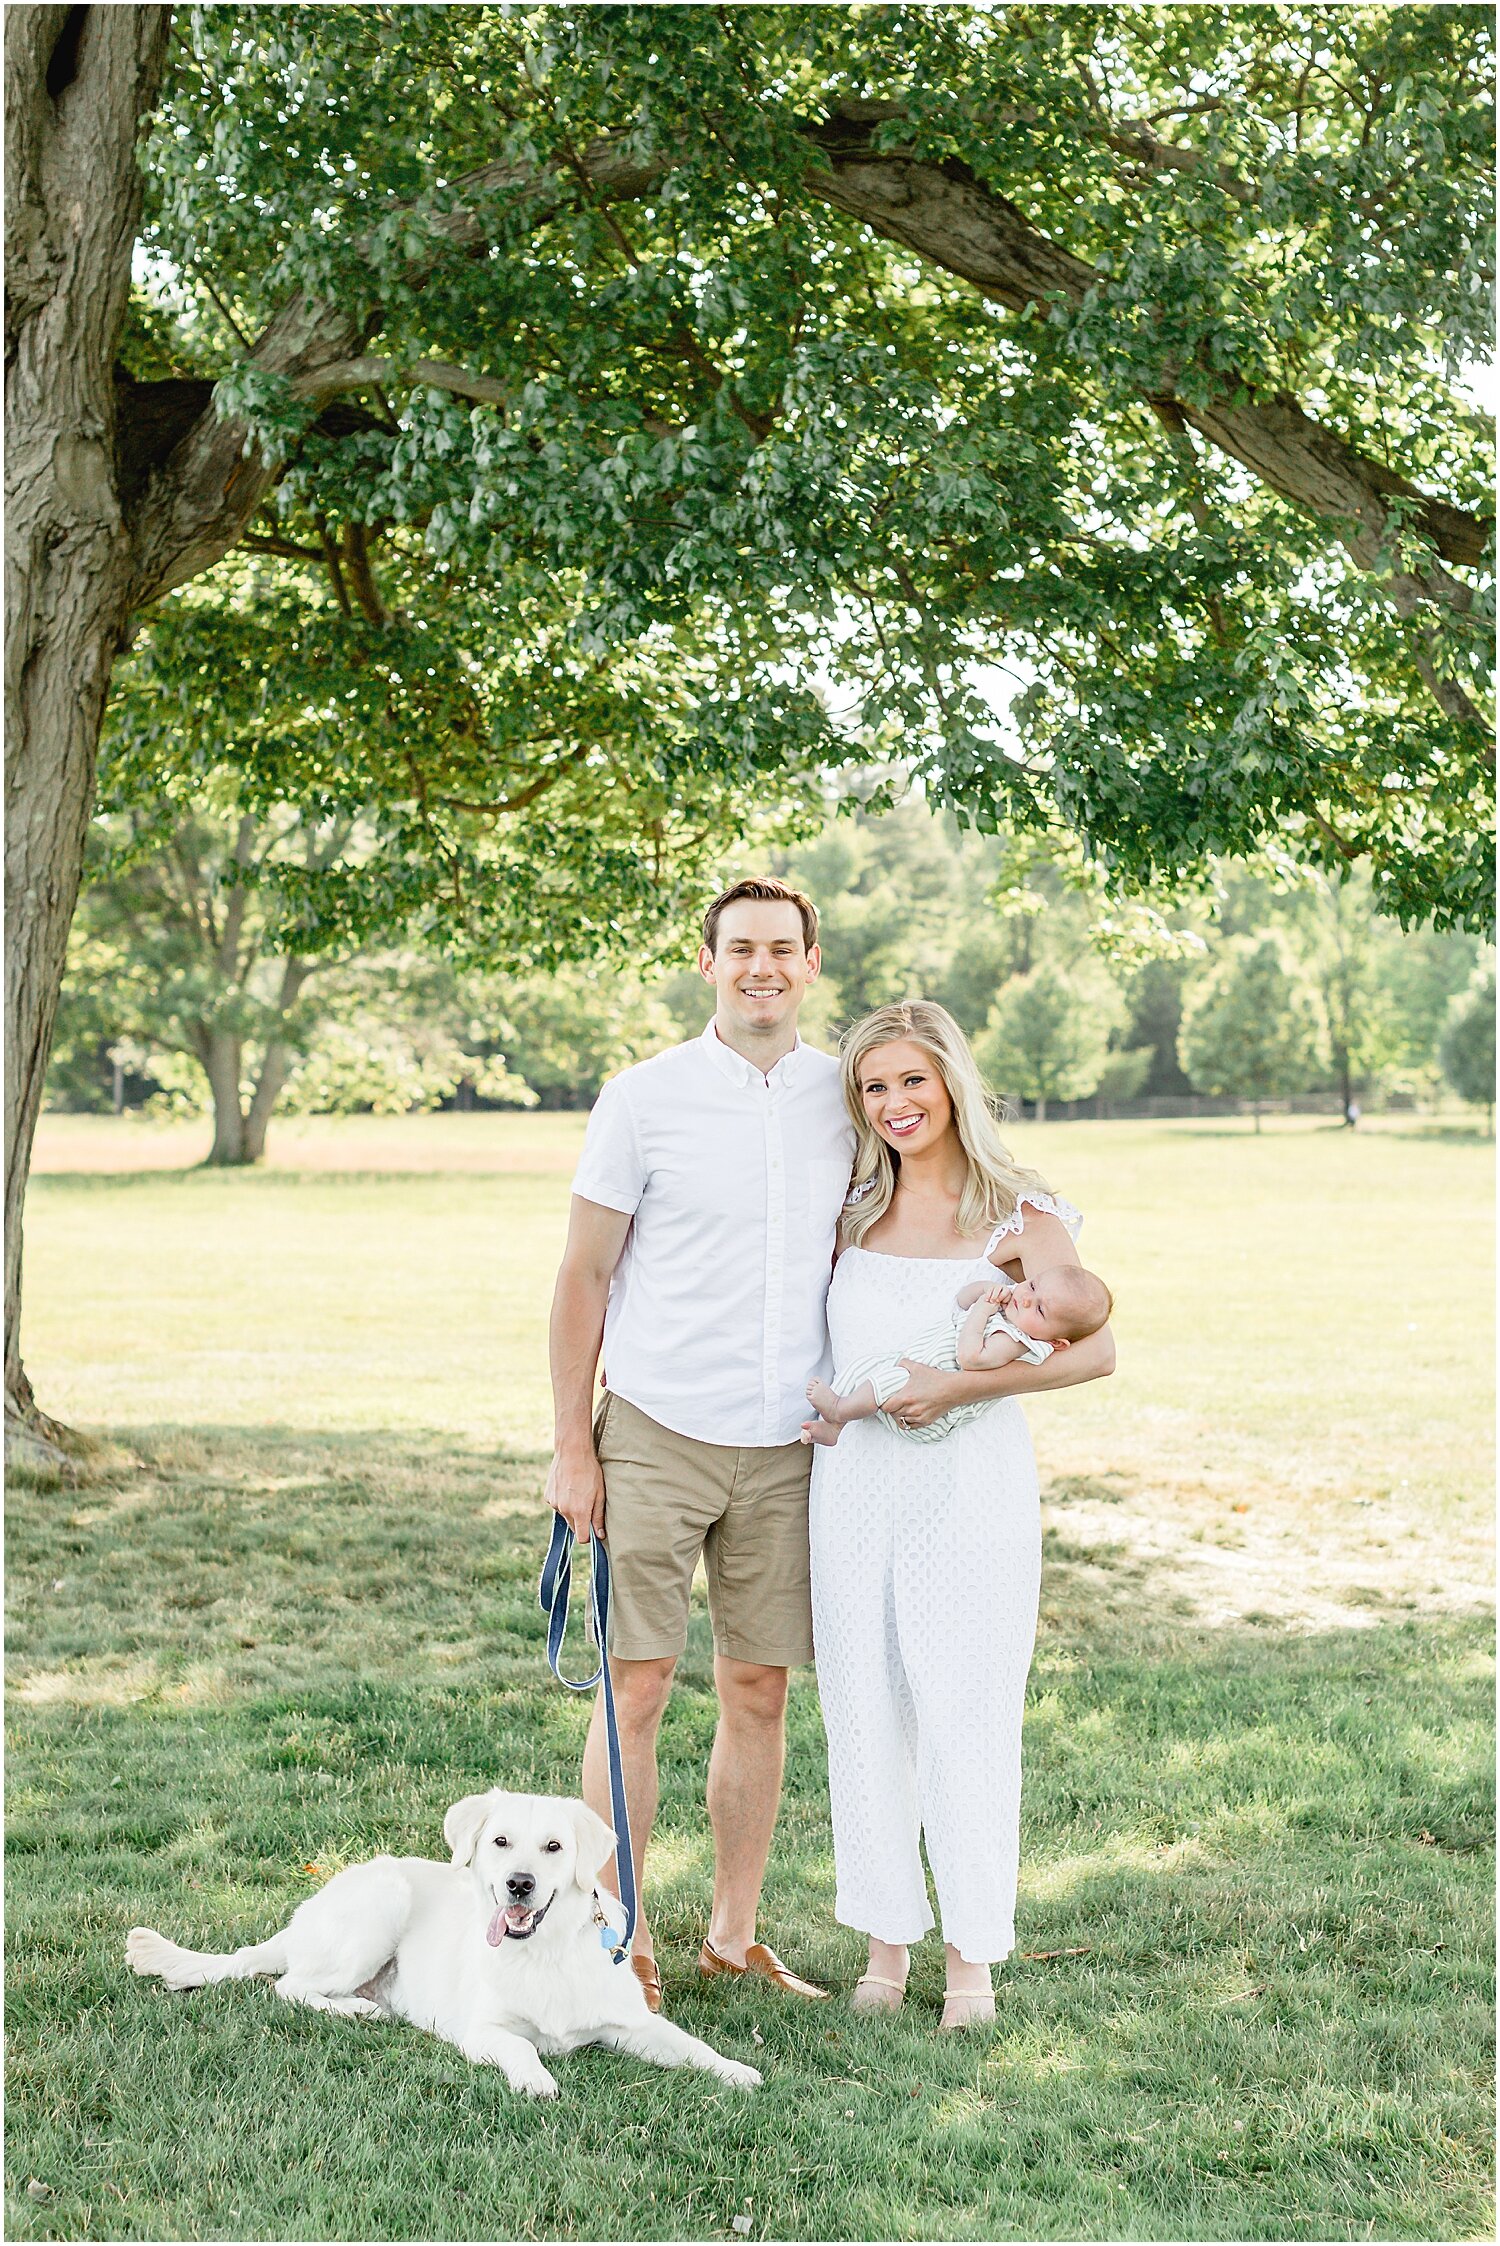 Connecticut Baby Photographer, Kristin Wood Photography, photographs outdoor newborn session at Waveny Park in New Canaan. 